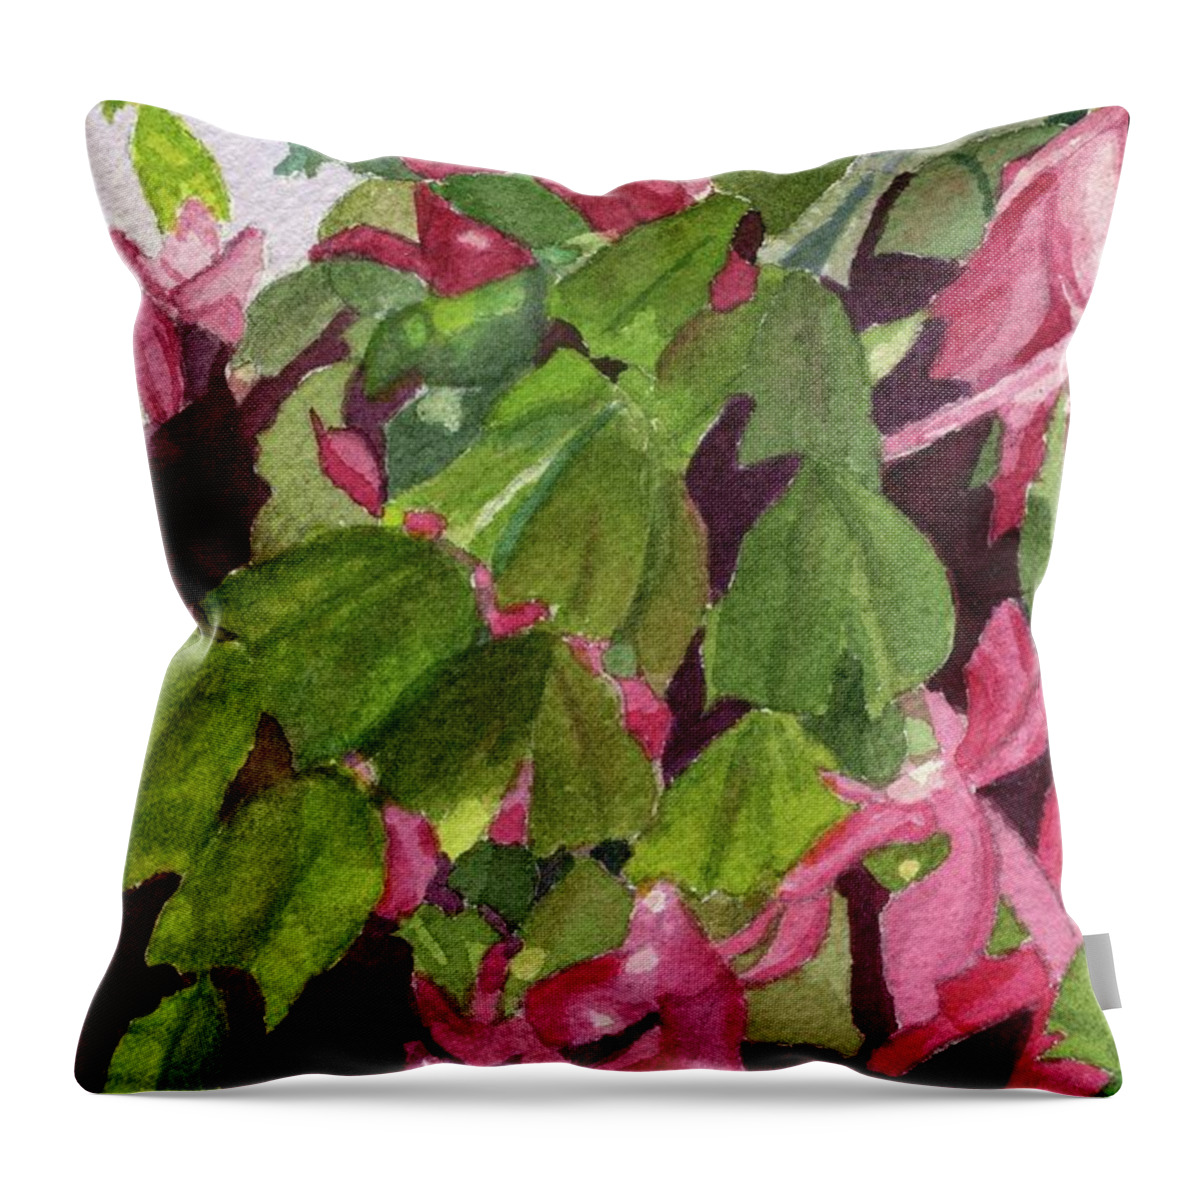 Floral Throw Pillow featuring the painting Christmas Cactus by Lynne Reichhart